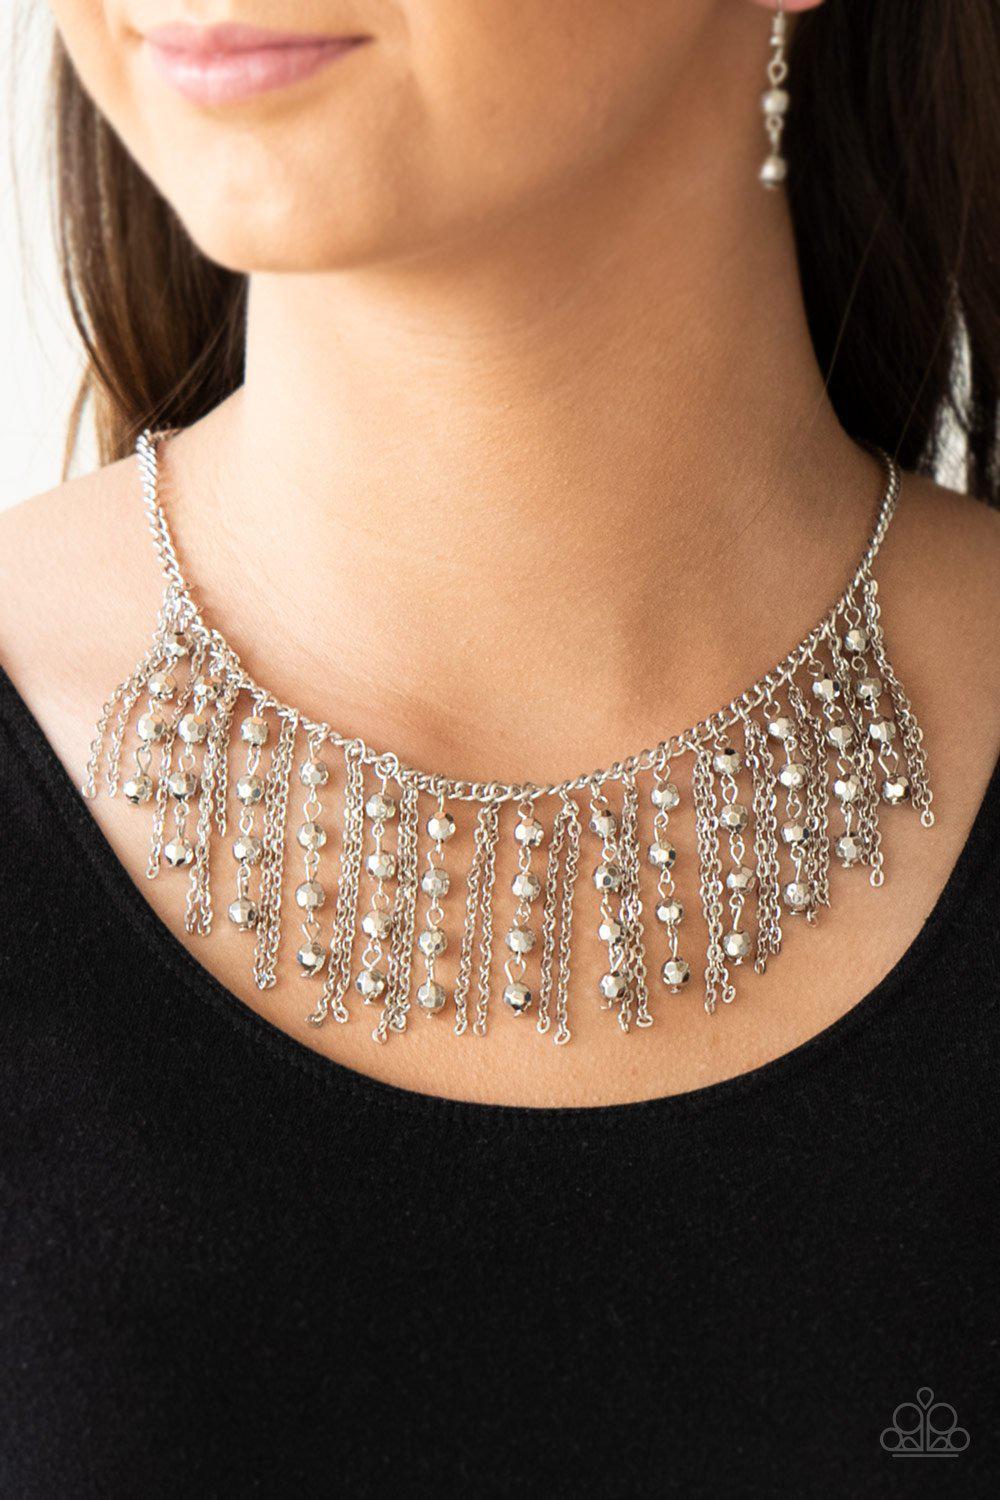 Rebel Remix Silver Fringe Necklace - Paparazzi Accessories- model - CarasShop.com - $5 Jewelry by Cara Jewels